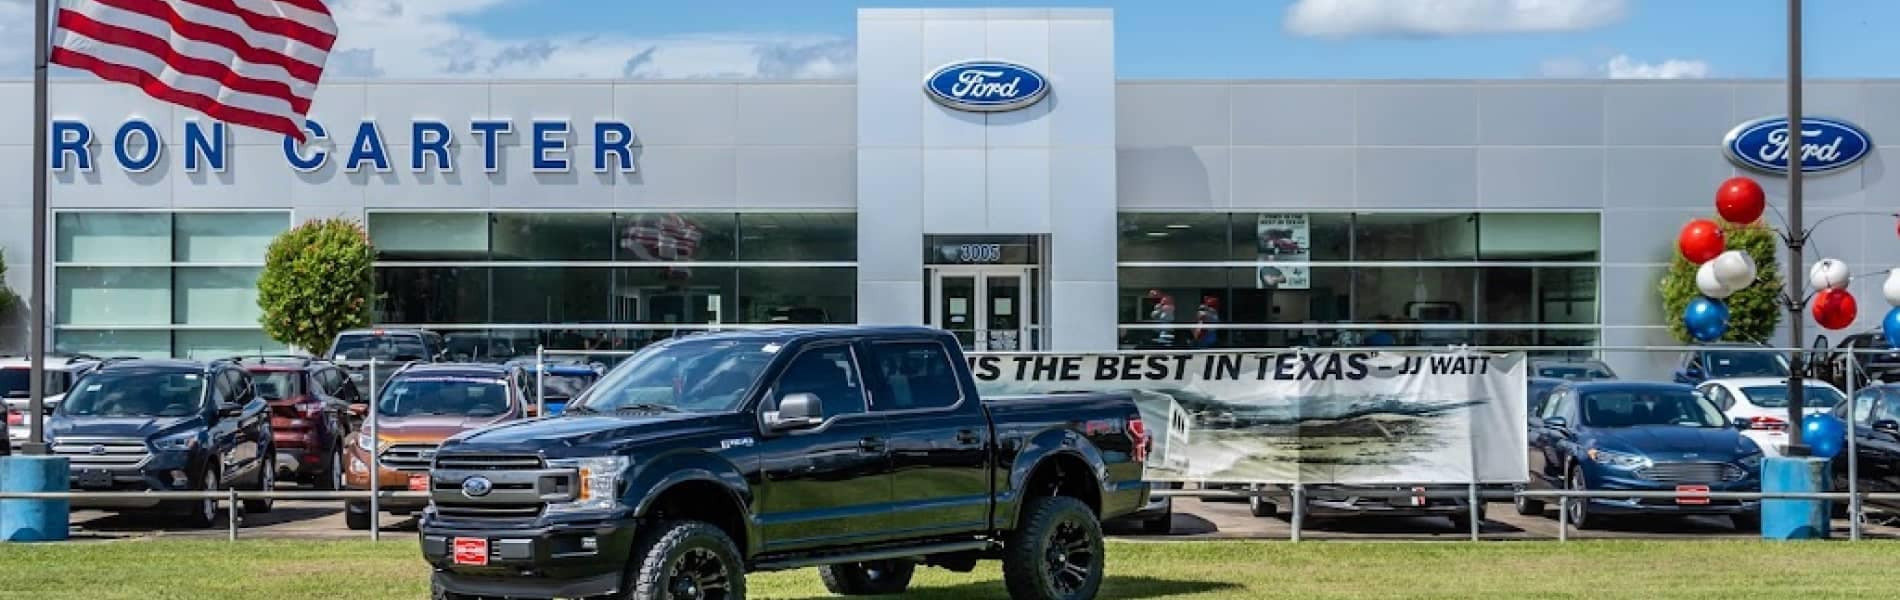 Ron Carter Ford in Alvin